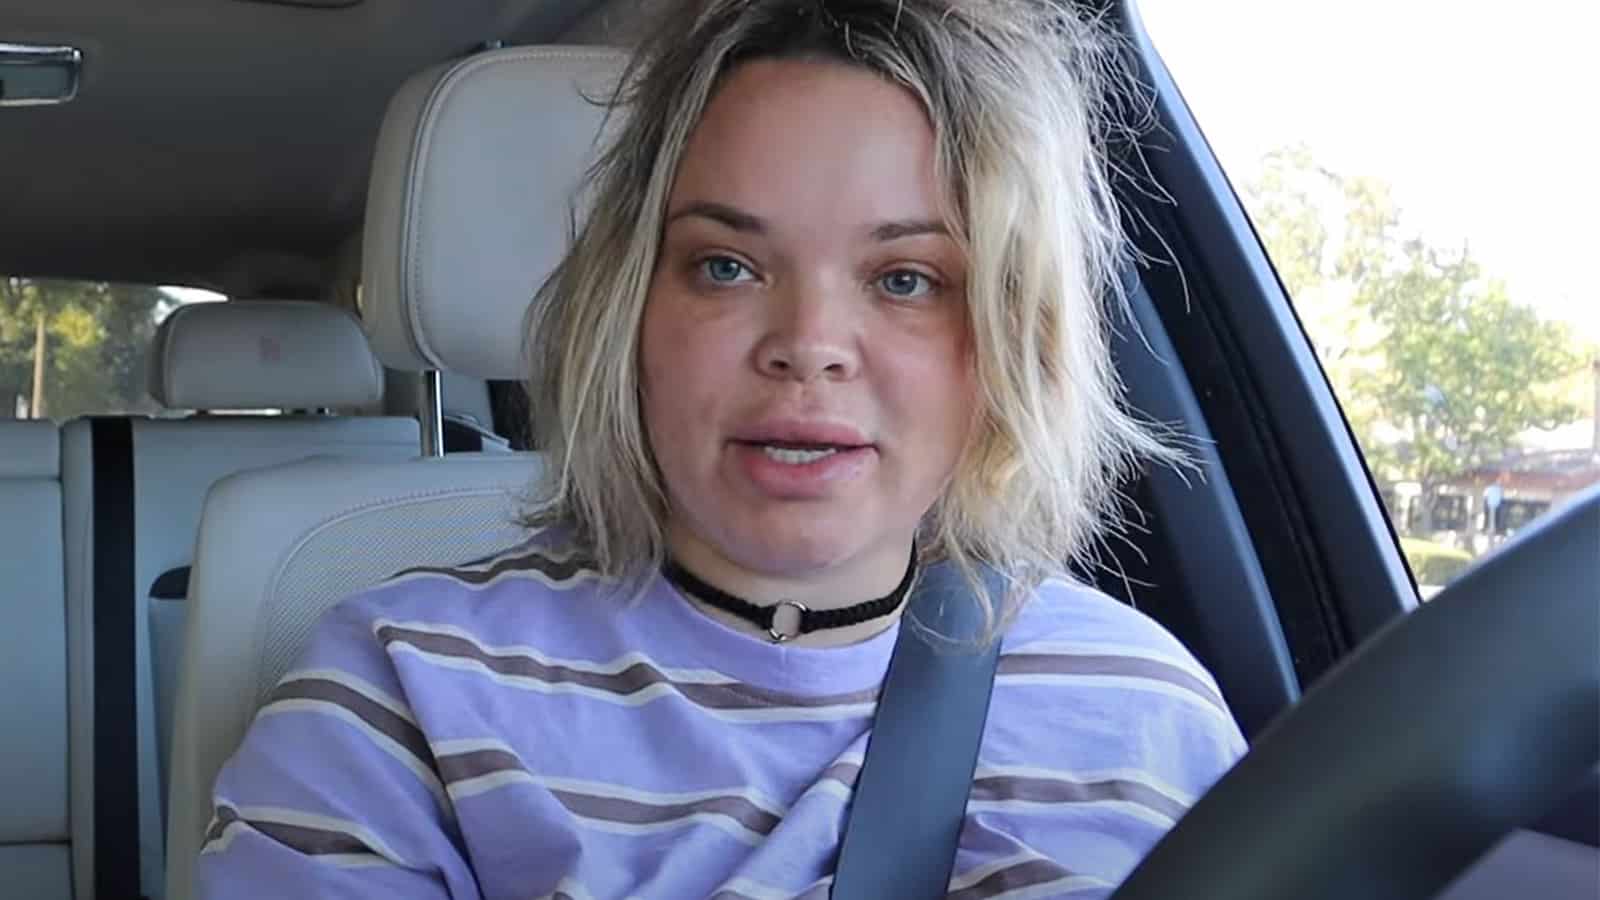 Trisha Paytas harassed by stranger trying to film her in car